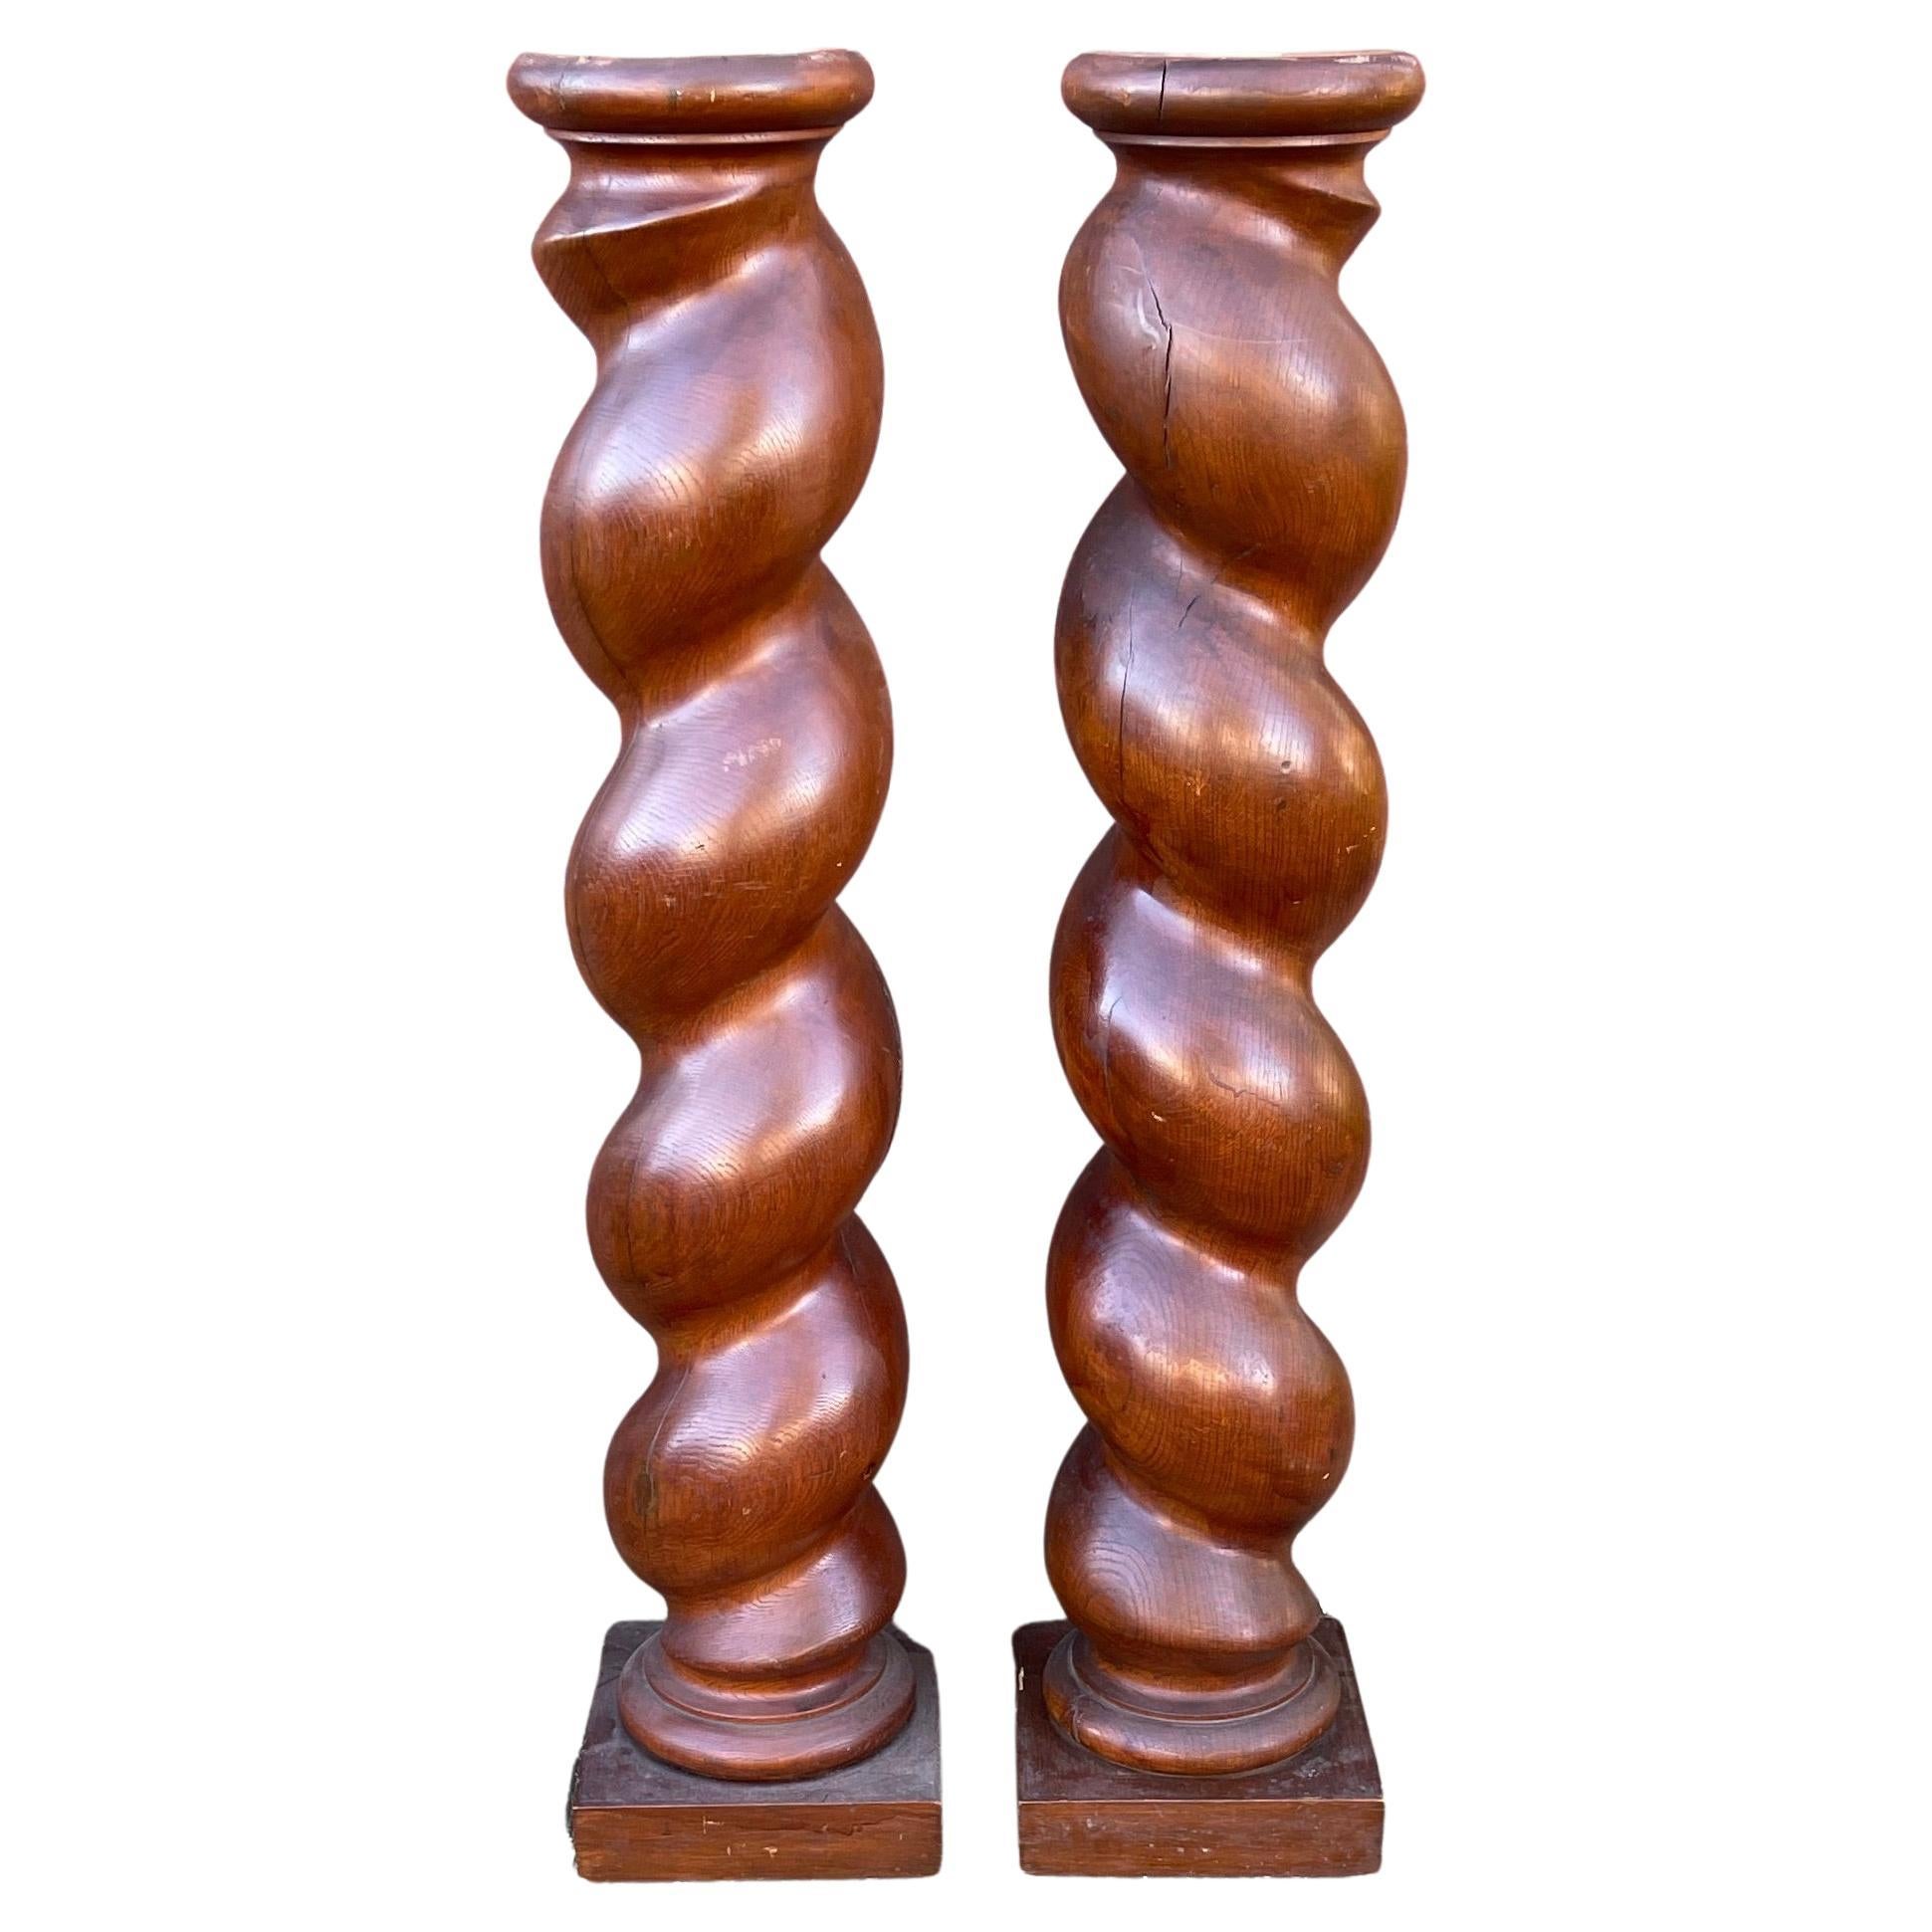 Large Antique Hand Crafted Pair of Barley Twist Columns / Pedestal Stands 1800s